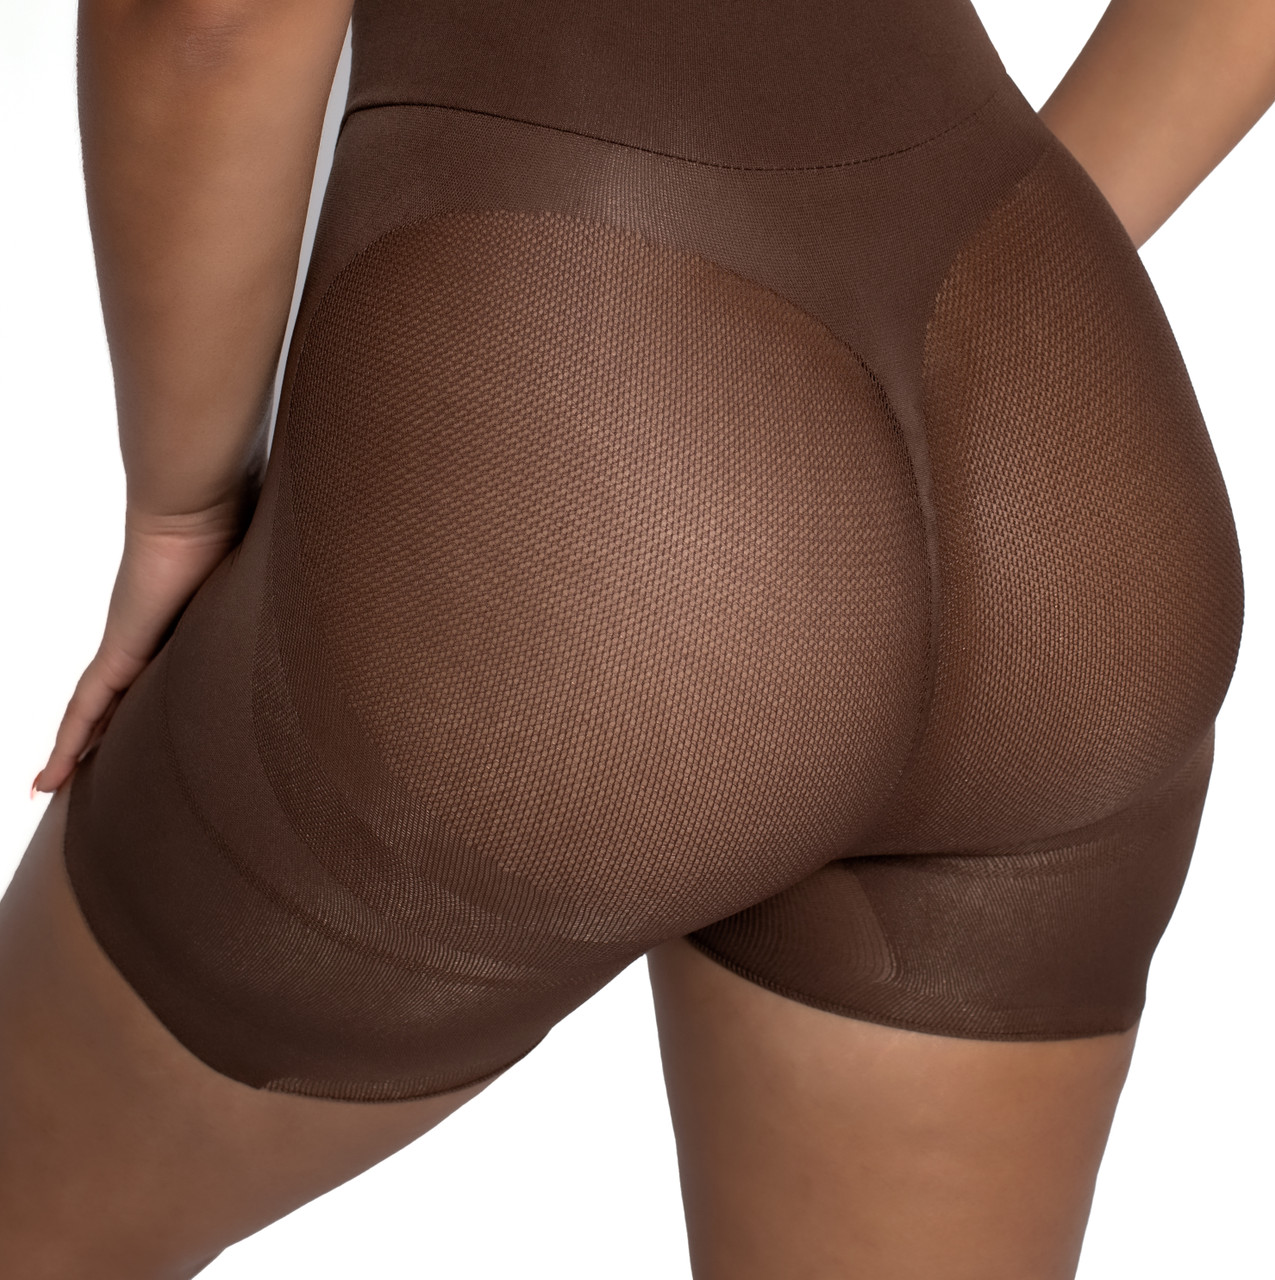 BEFORE YOU BUY Happy Butt N°7 Double Layer: Yahaira Shapewear on Average  Body Type 